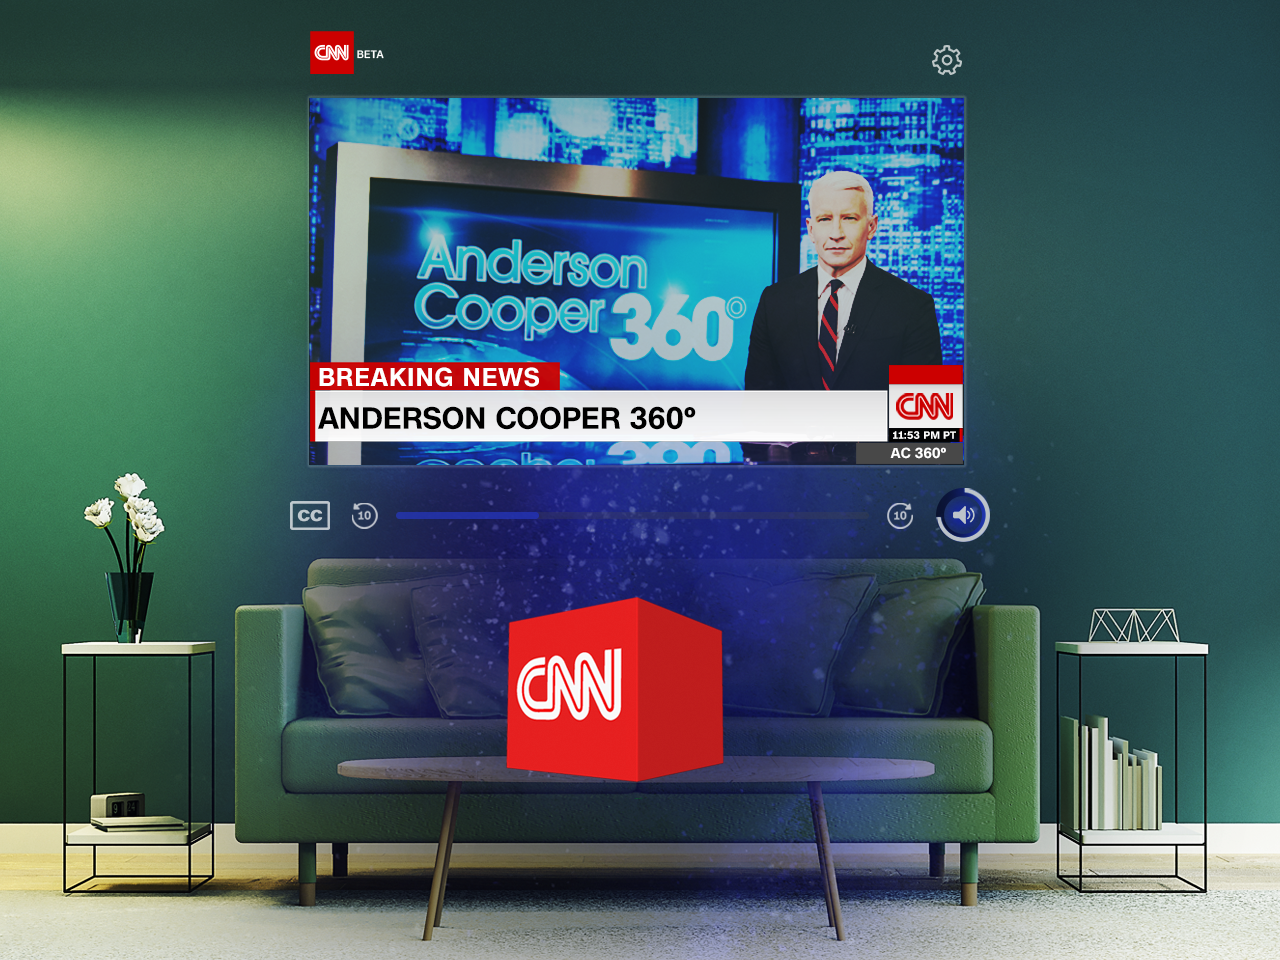 CNN Begins Broadcasting News with an App for Magic Leap One